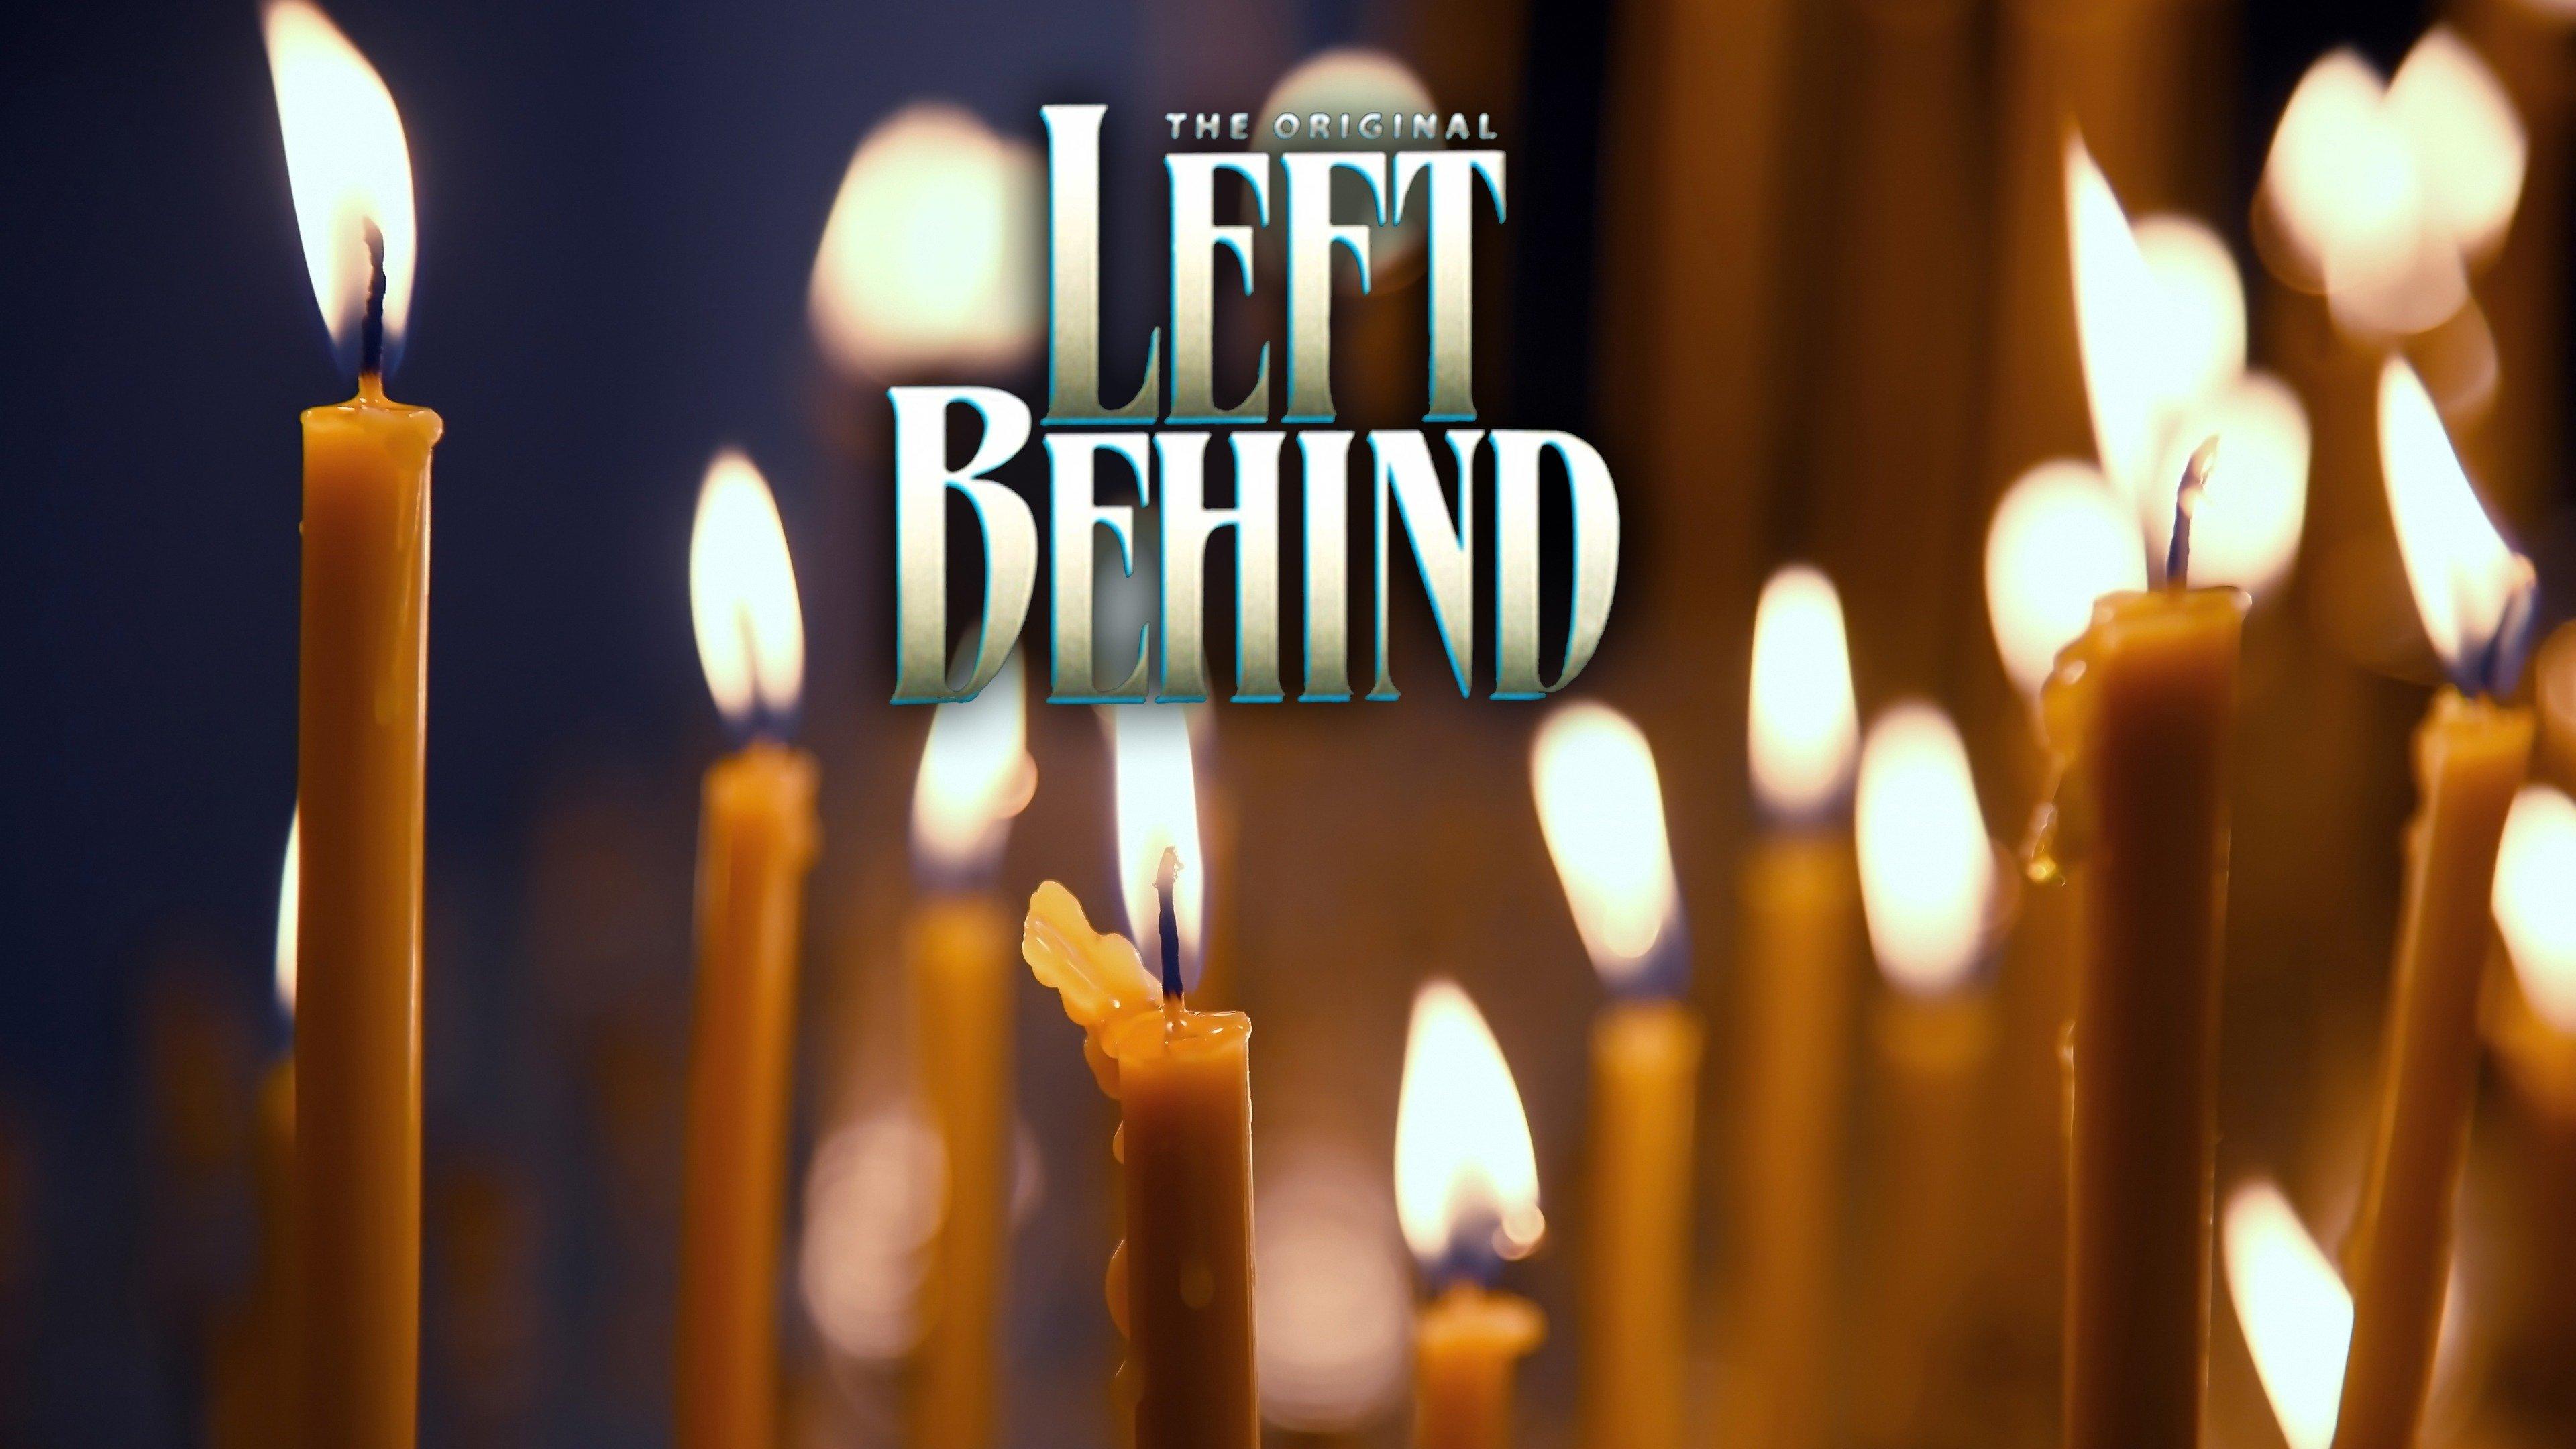 Watch The Original Left Behind Streaming Online on Philo (Free Trial)